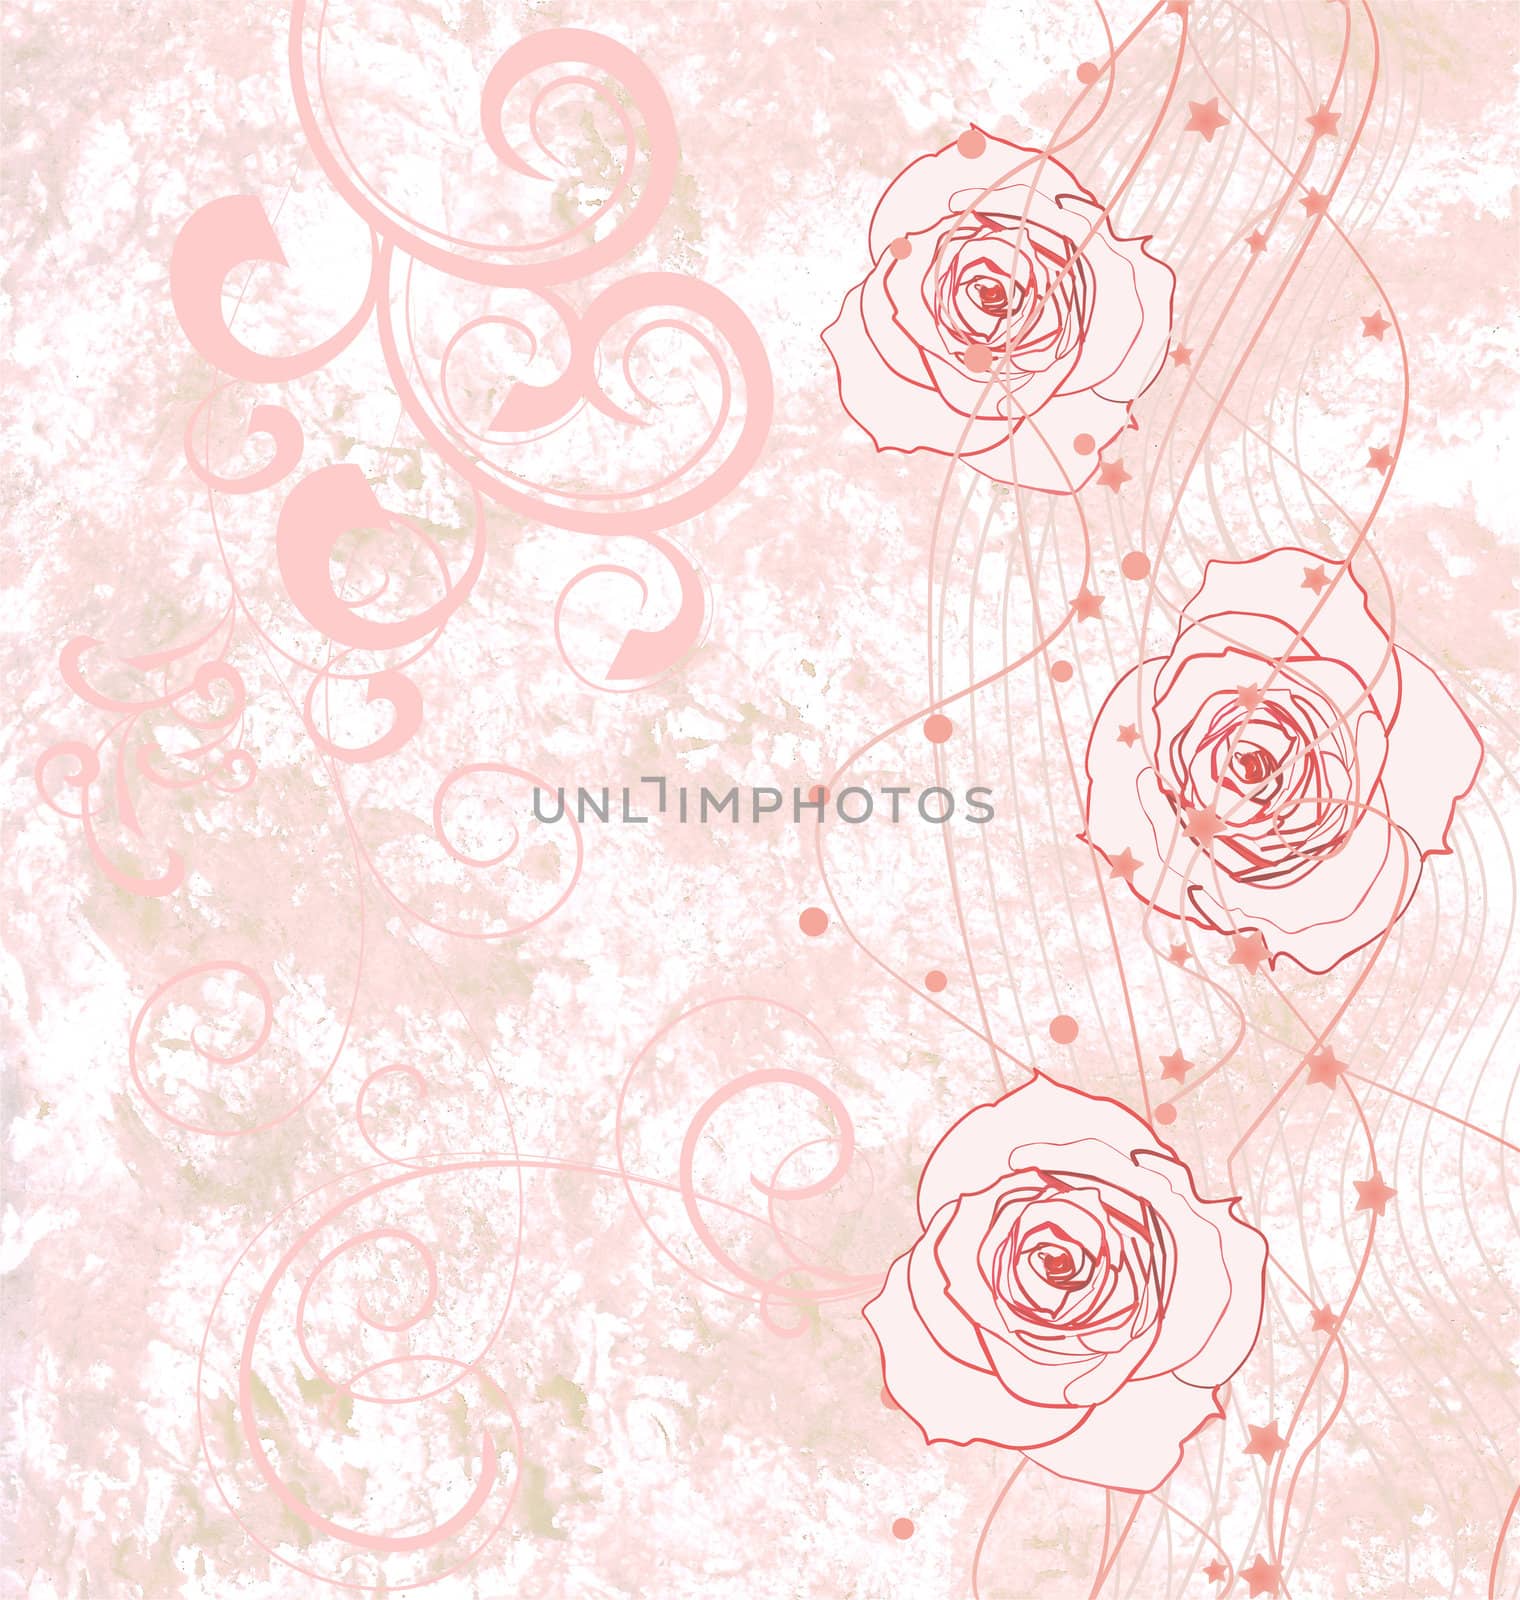 pink roses grunge illustration with flourishes for wedding or bi by CherJu